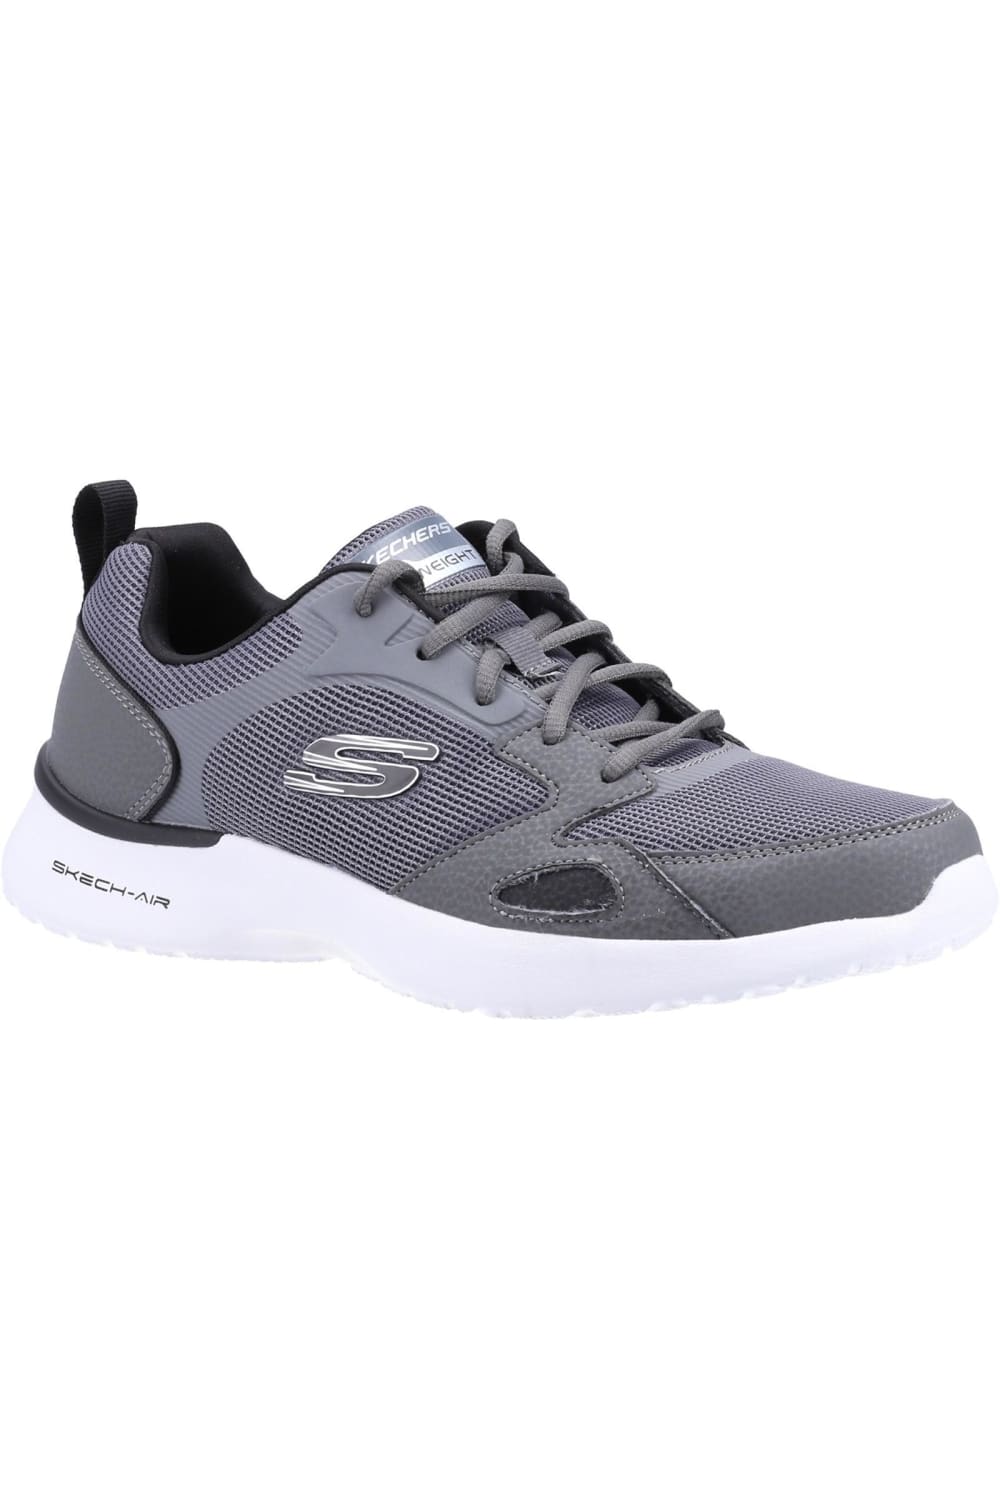 Mens Sketch-Air Dynamight Sneakers - Charcoal